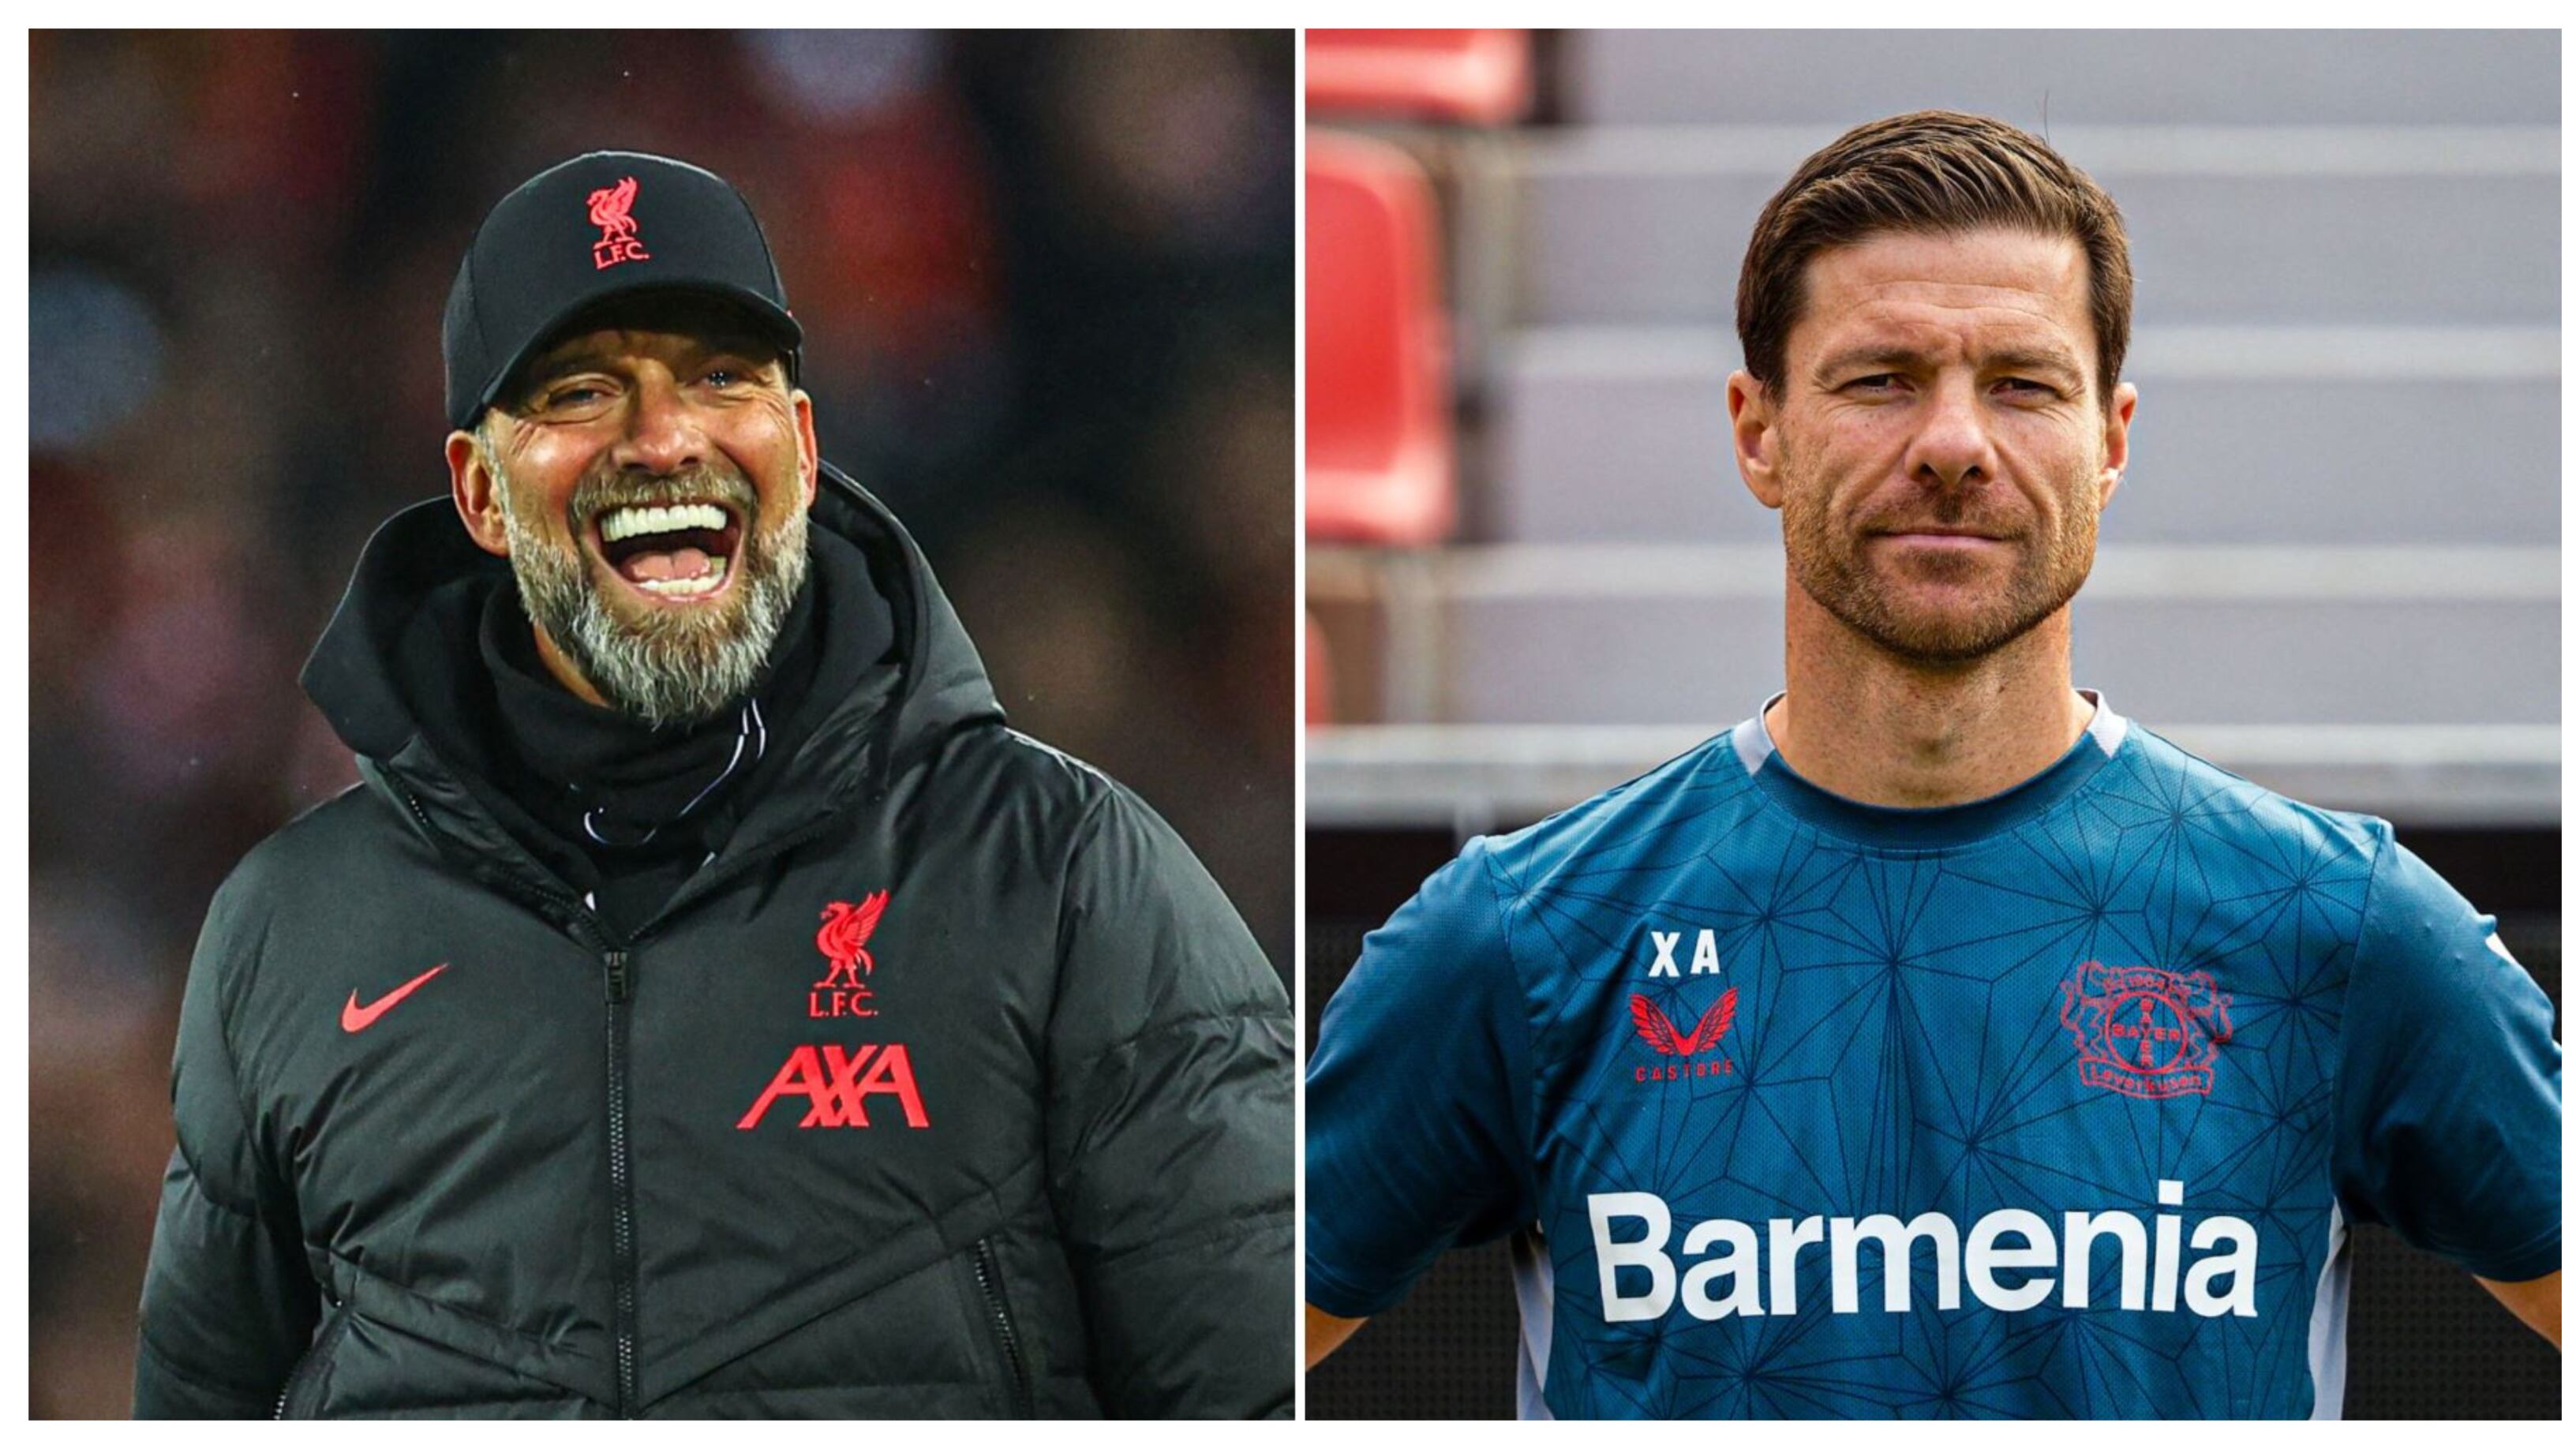 Liverpool celebrate, Xabi's decision makes him the perfect replacement for Klopp